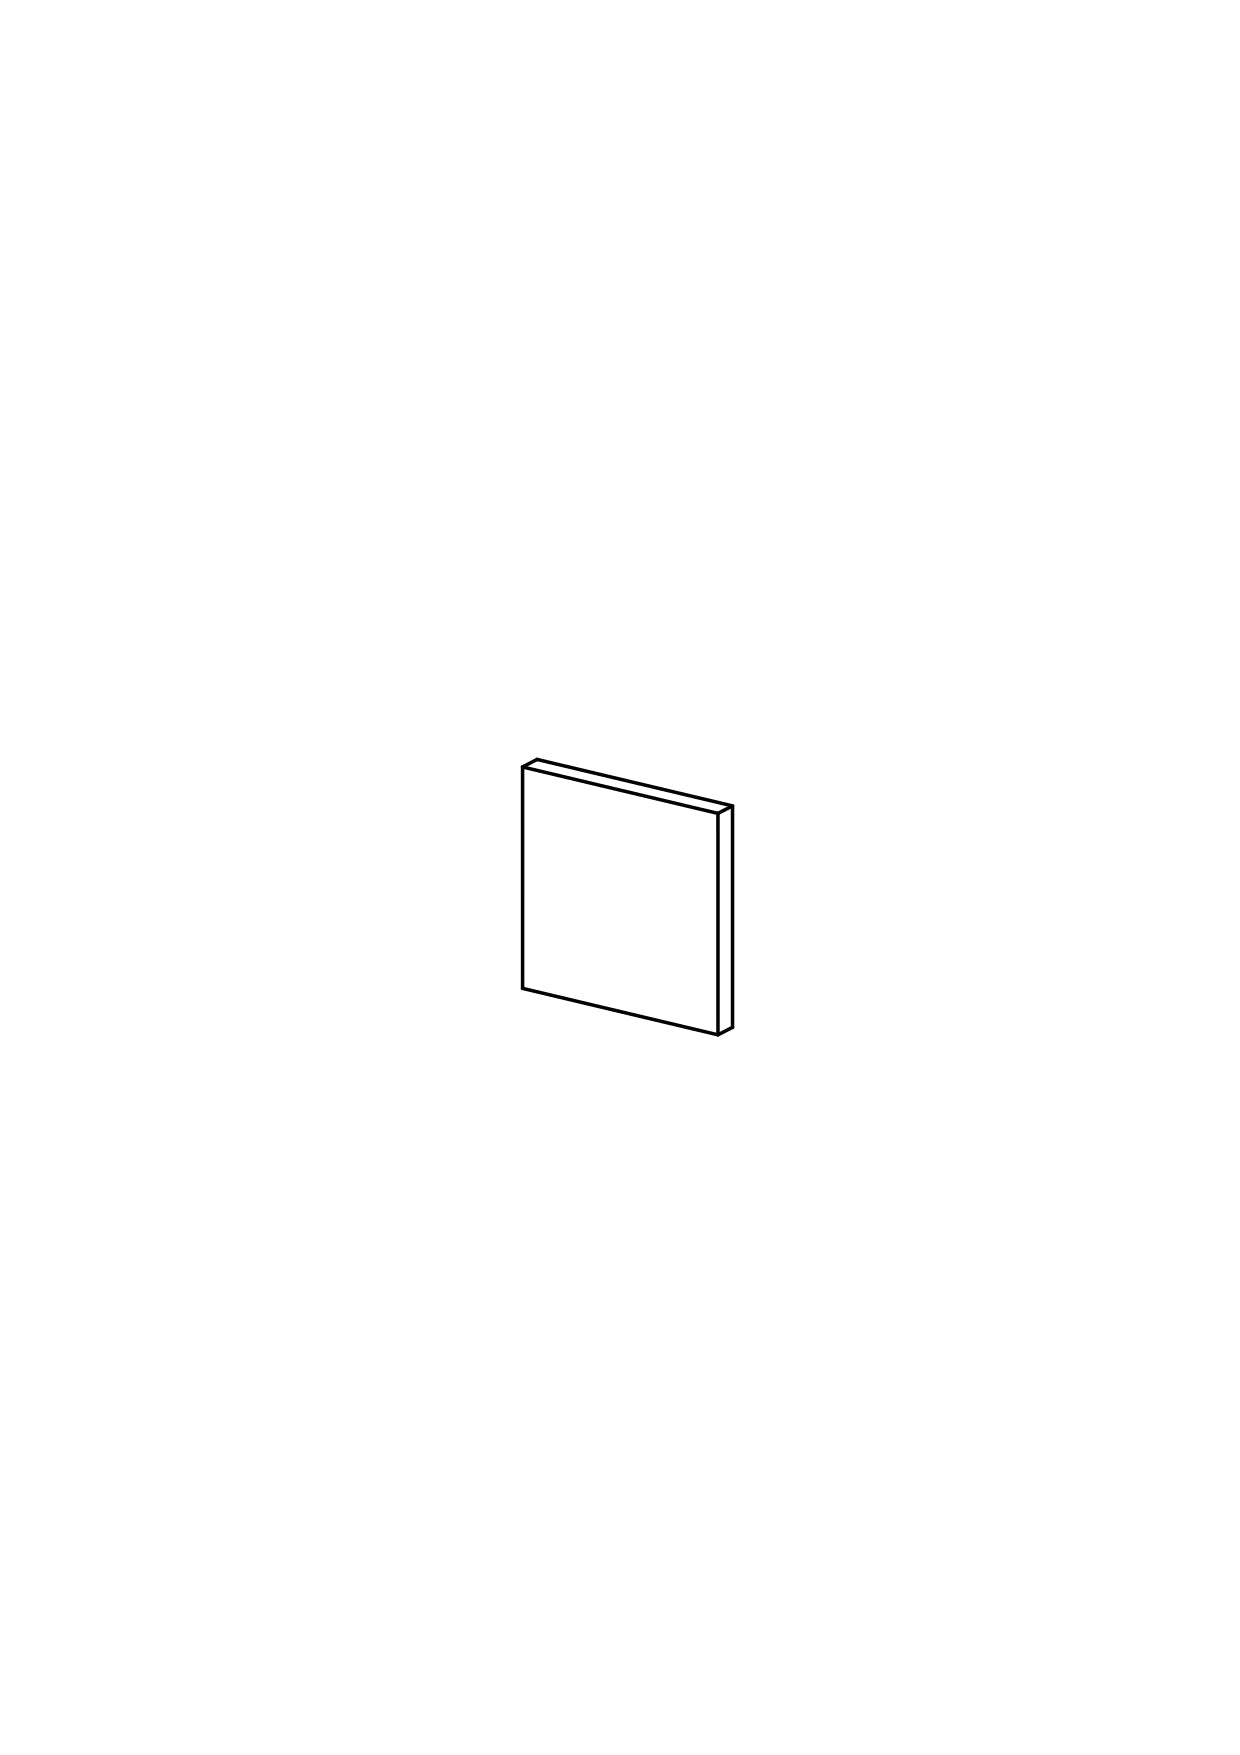 40x40 - Cover Panel - Plain - Unpainted (Raw) - METOD